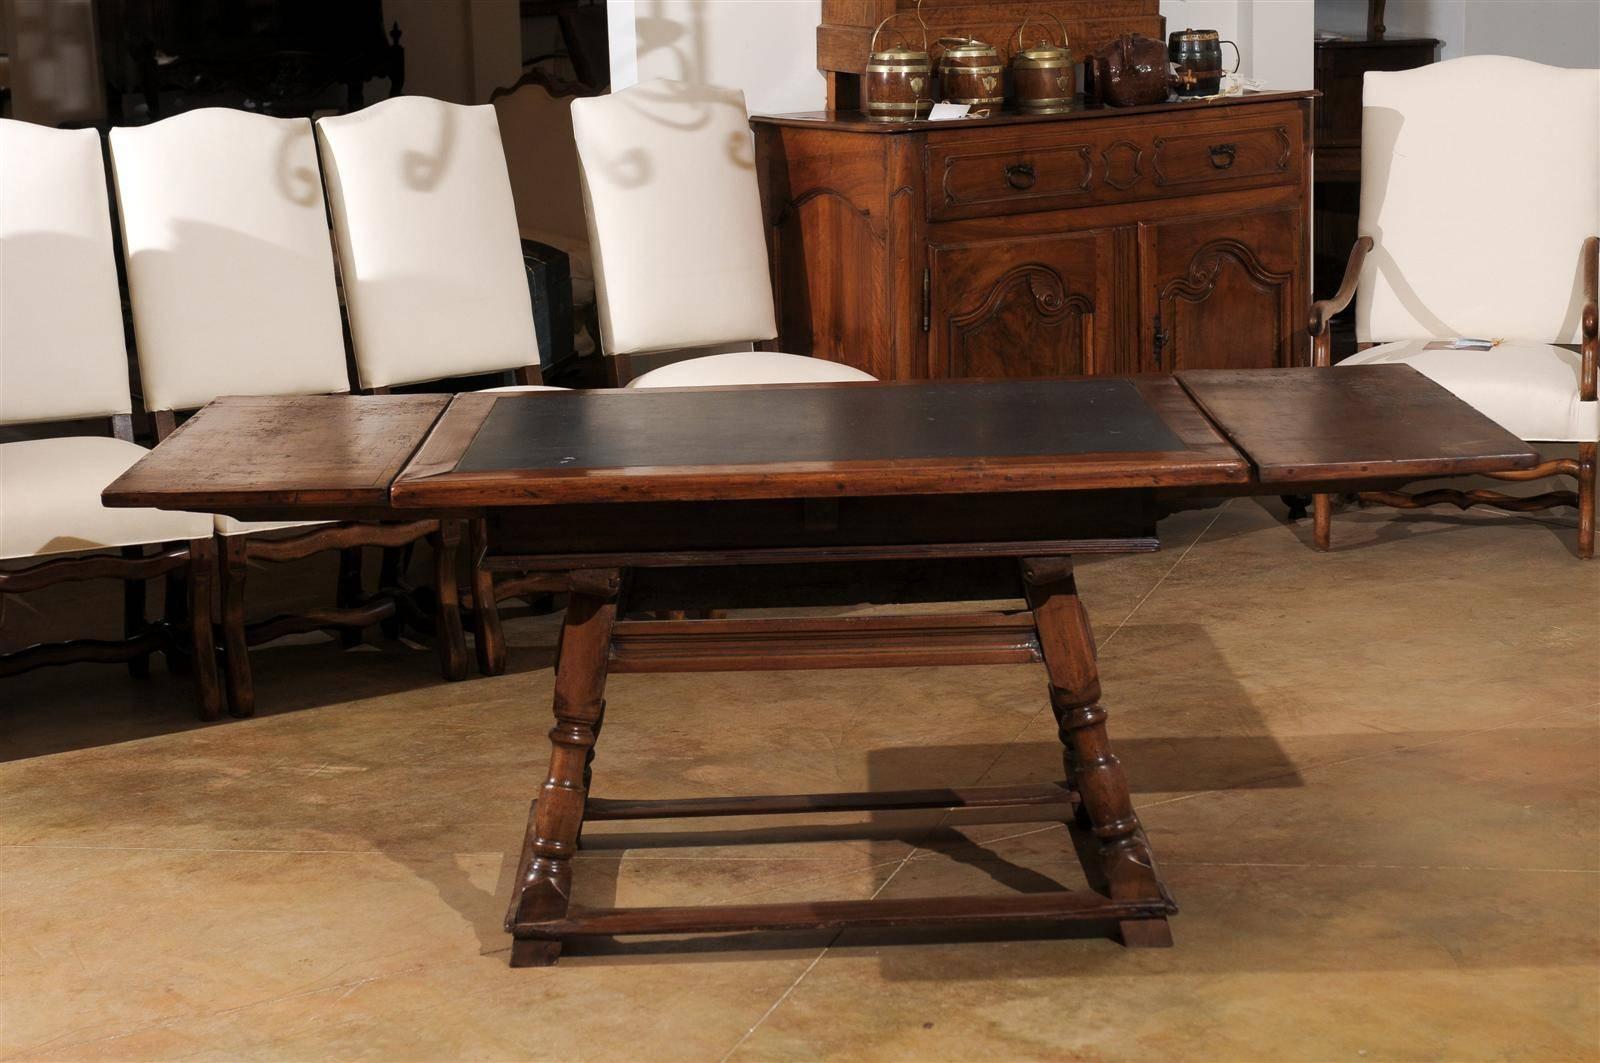 A Swiss wooden draw-leaf extension table with inset slate top, single side drawer and turned base from the early 19th century. This extension table was born in Switzerland in the early years of the 19th century. The rectangular top is adorned with